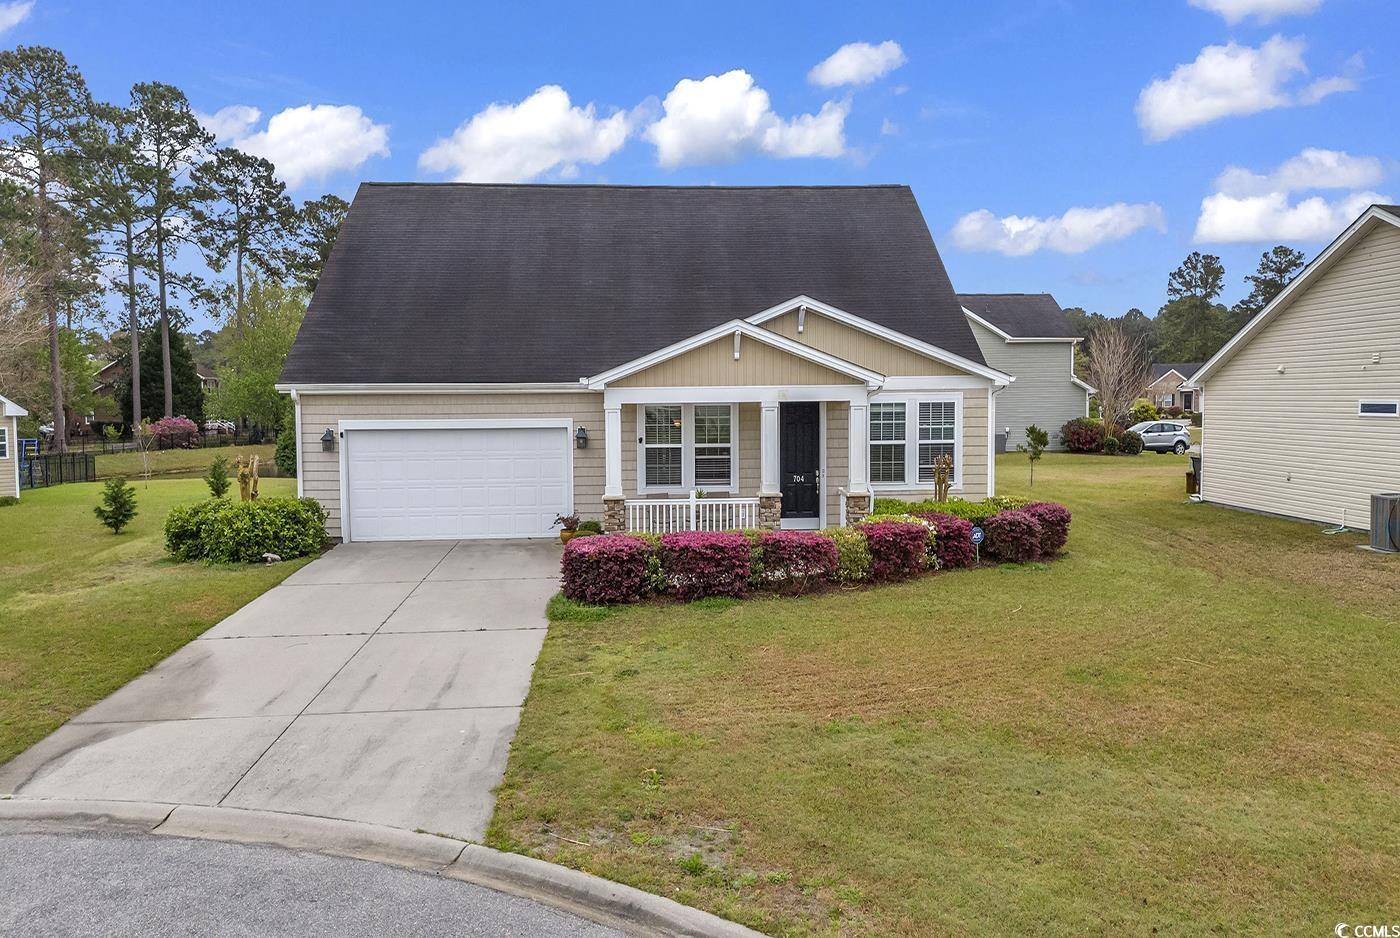 Photo one of 704 Walking Fern Ct. Conway SC 29526 | MLS 2408060